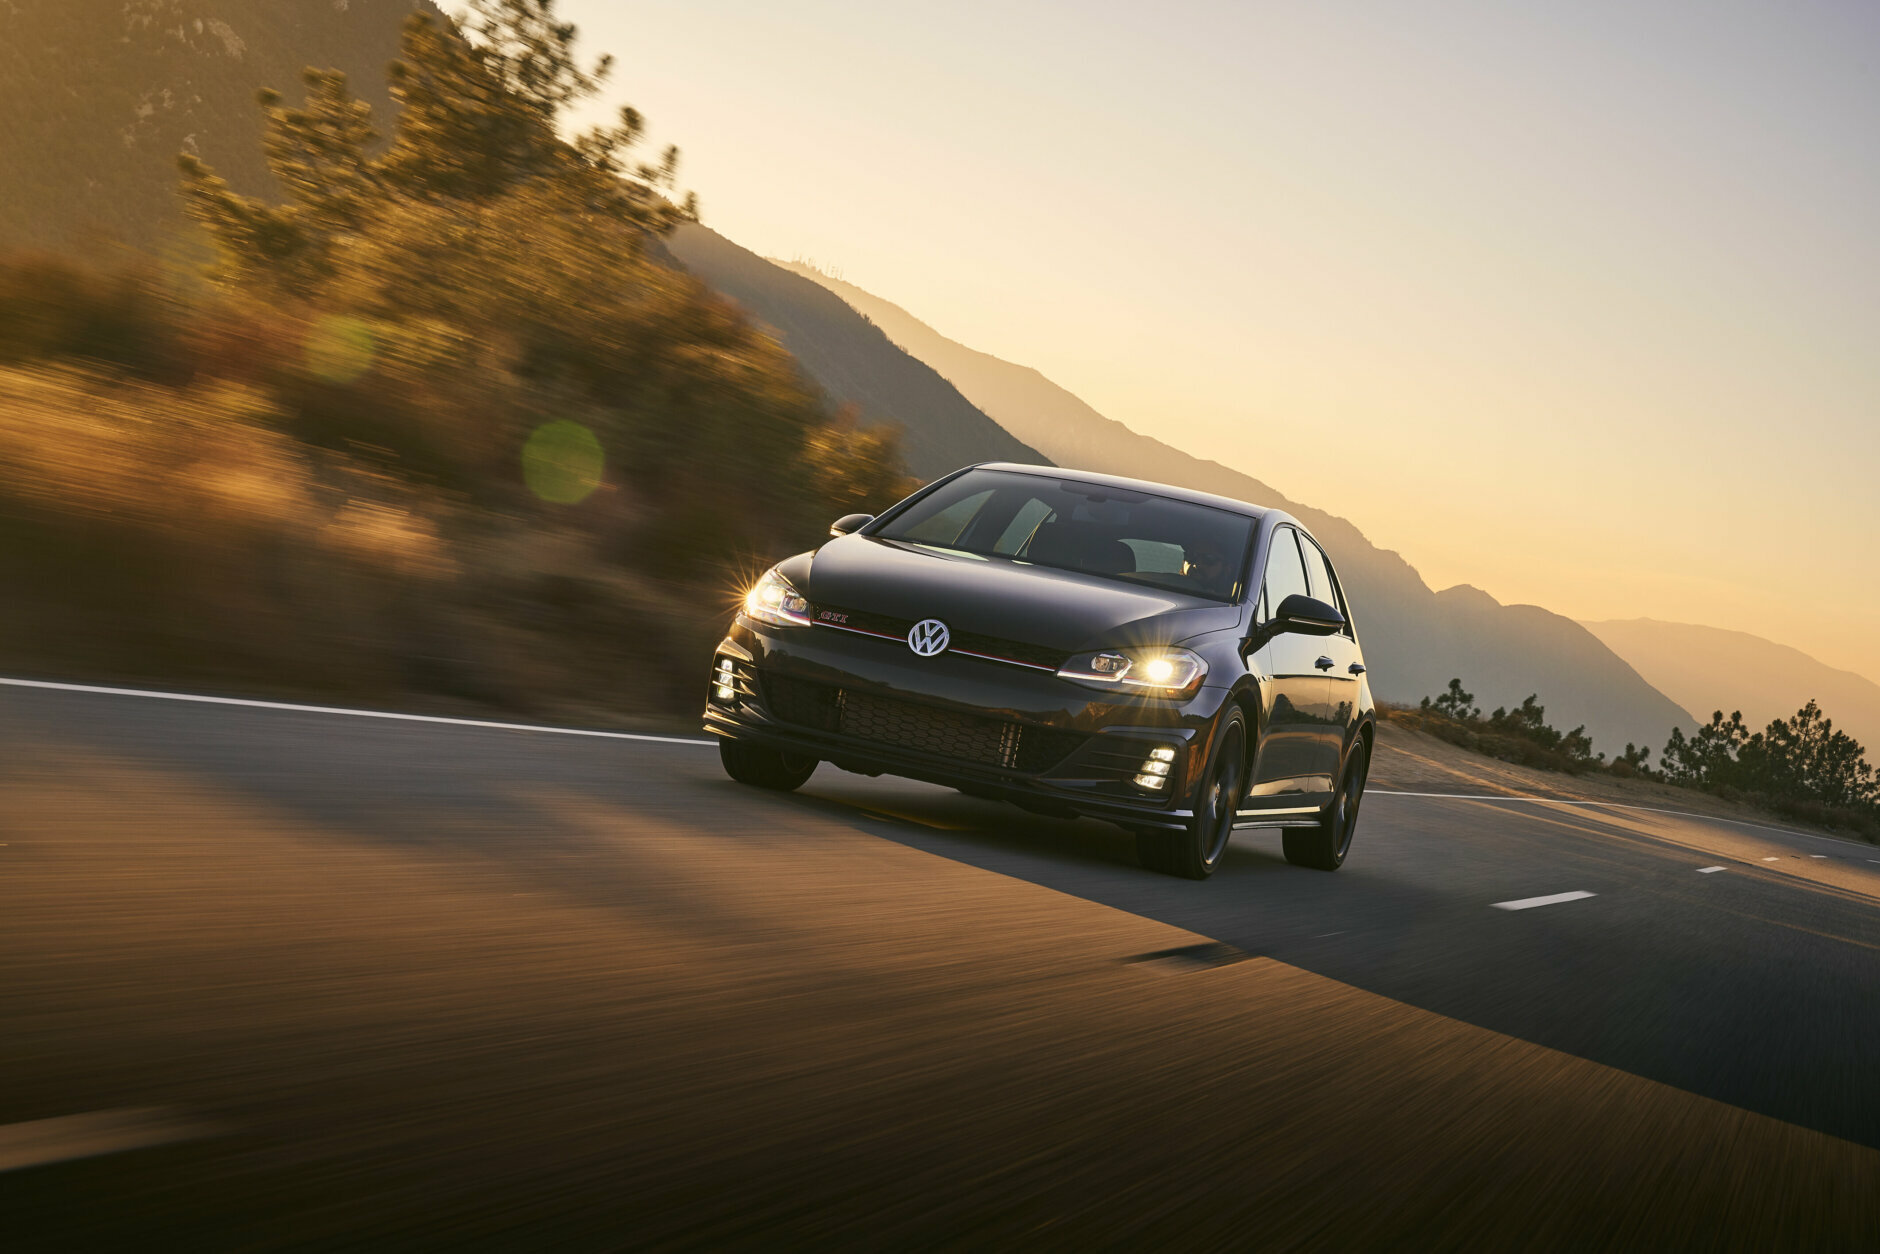 <h3><strong>2020 Volkswagen GTI</strong></h3>
<p><strong>Purchase Deal: </strong>0% financing for 72 months with 120-day first payment deferral</p>
